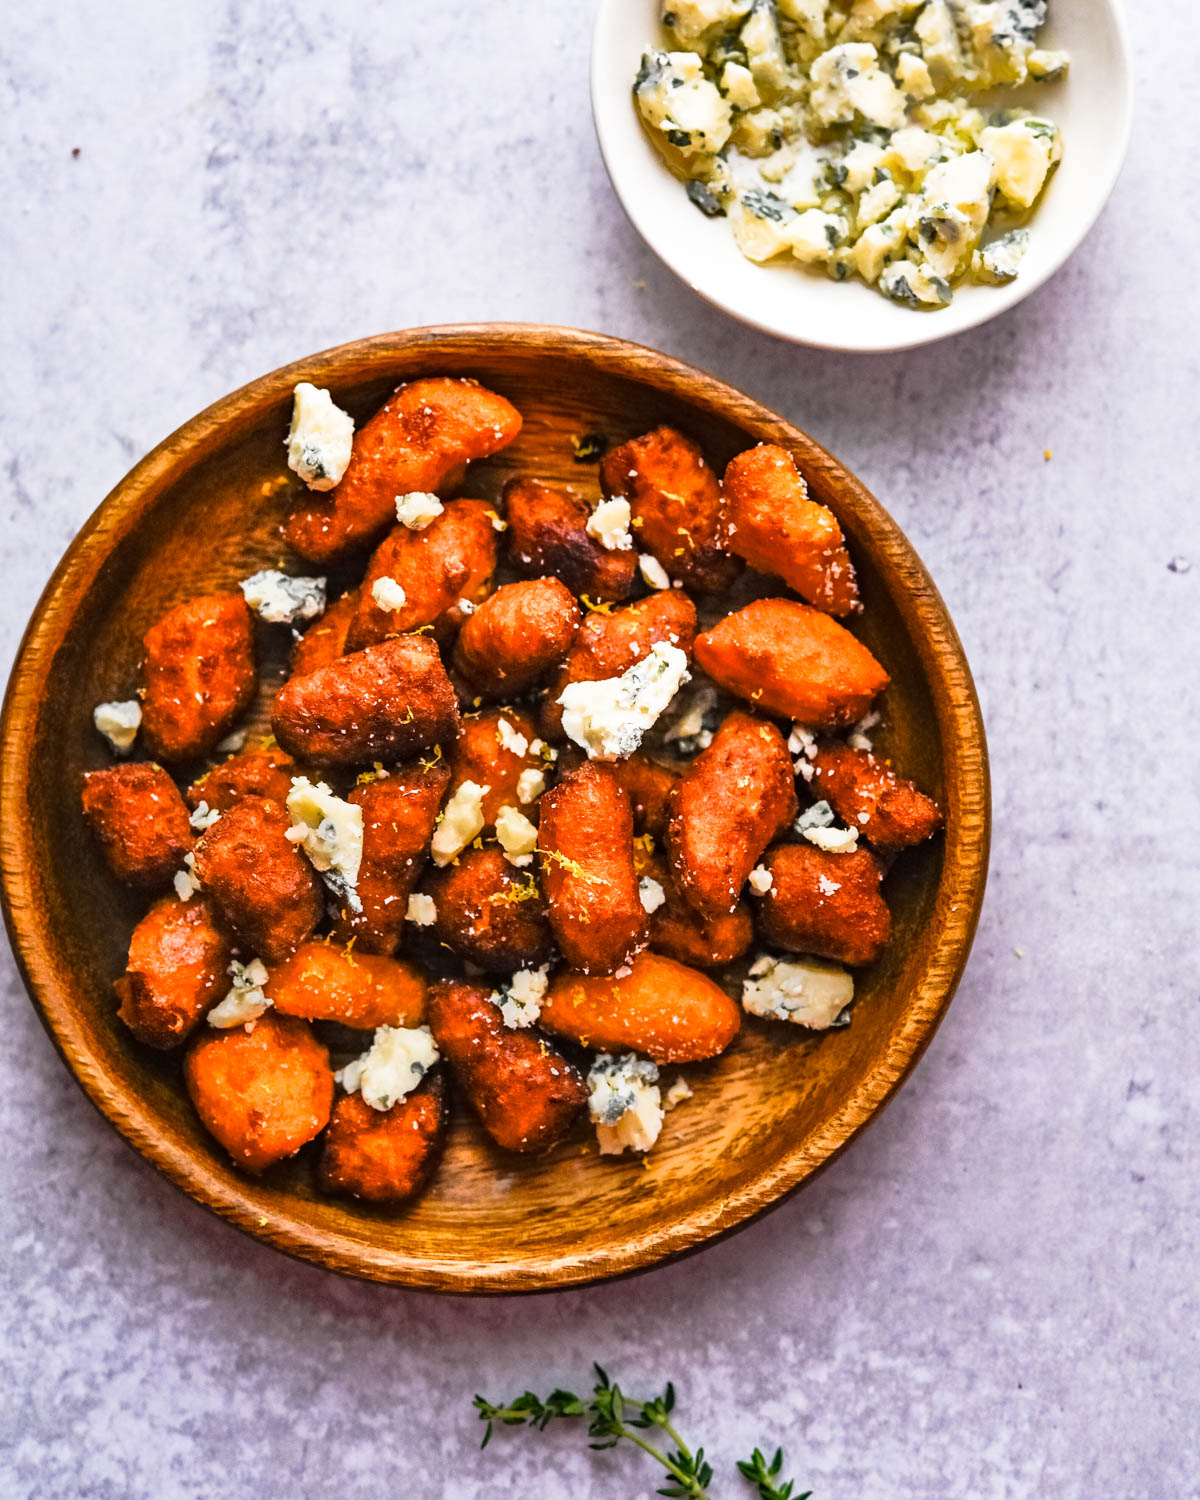 fried sweet potato gnocchi with lemon zest and blue cheese crumbles.